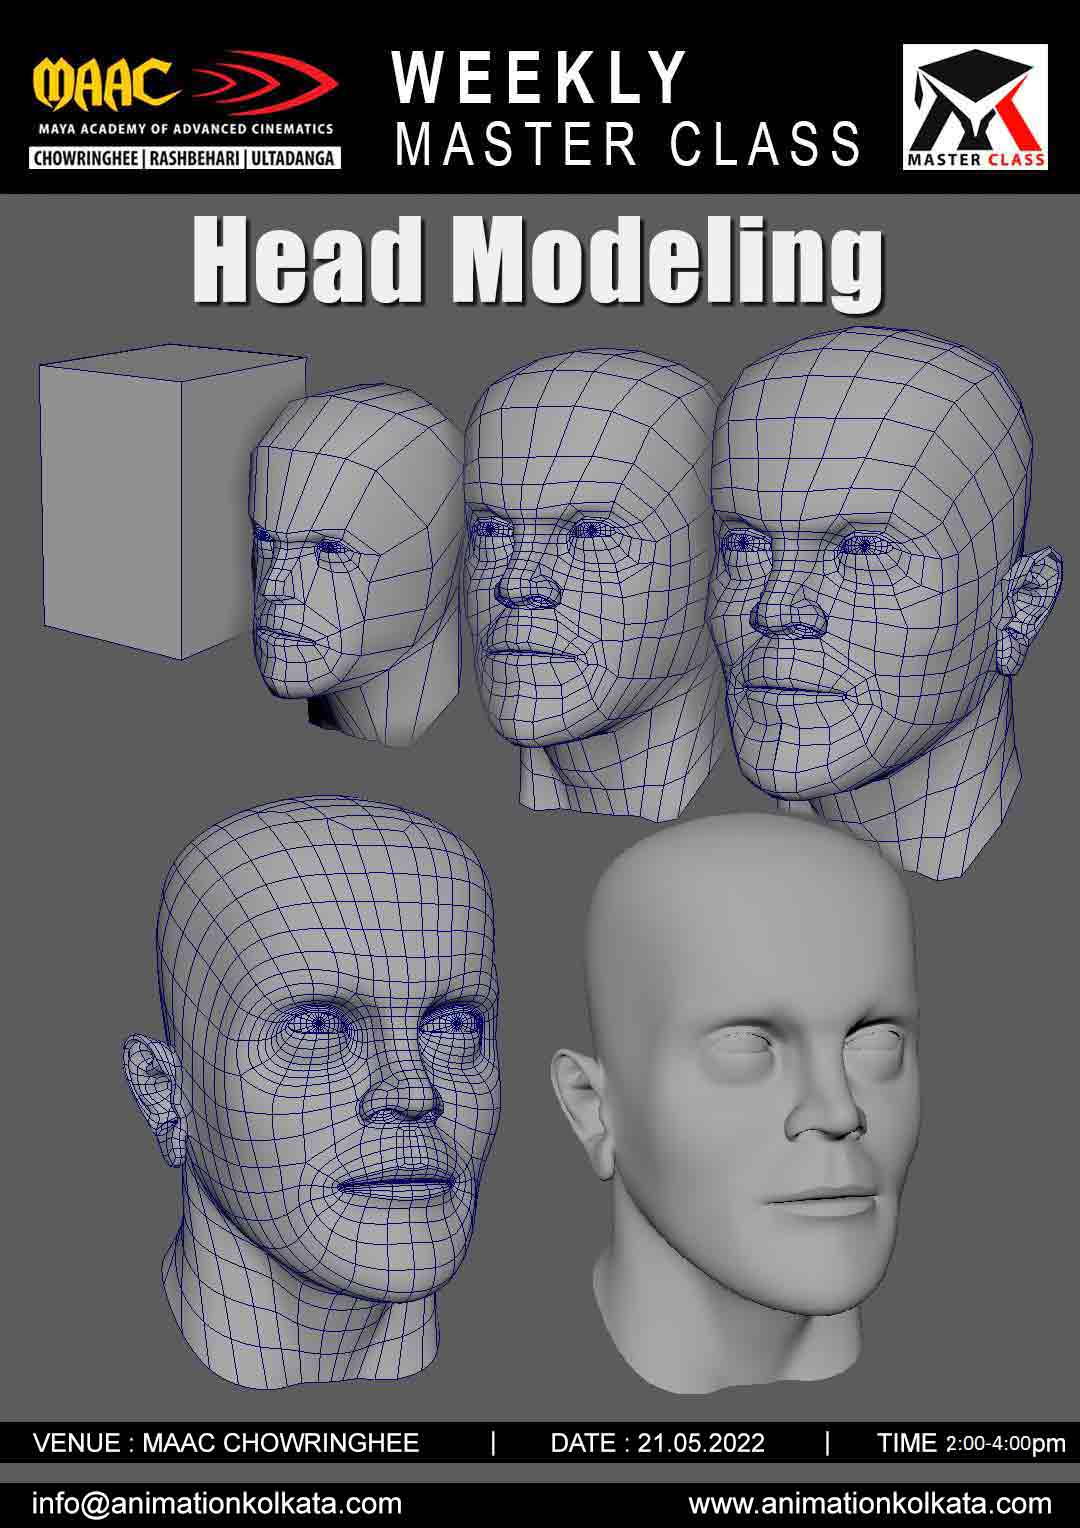 Weekly Master Class on Head Modeling